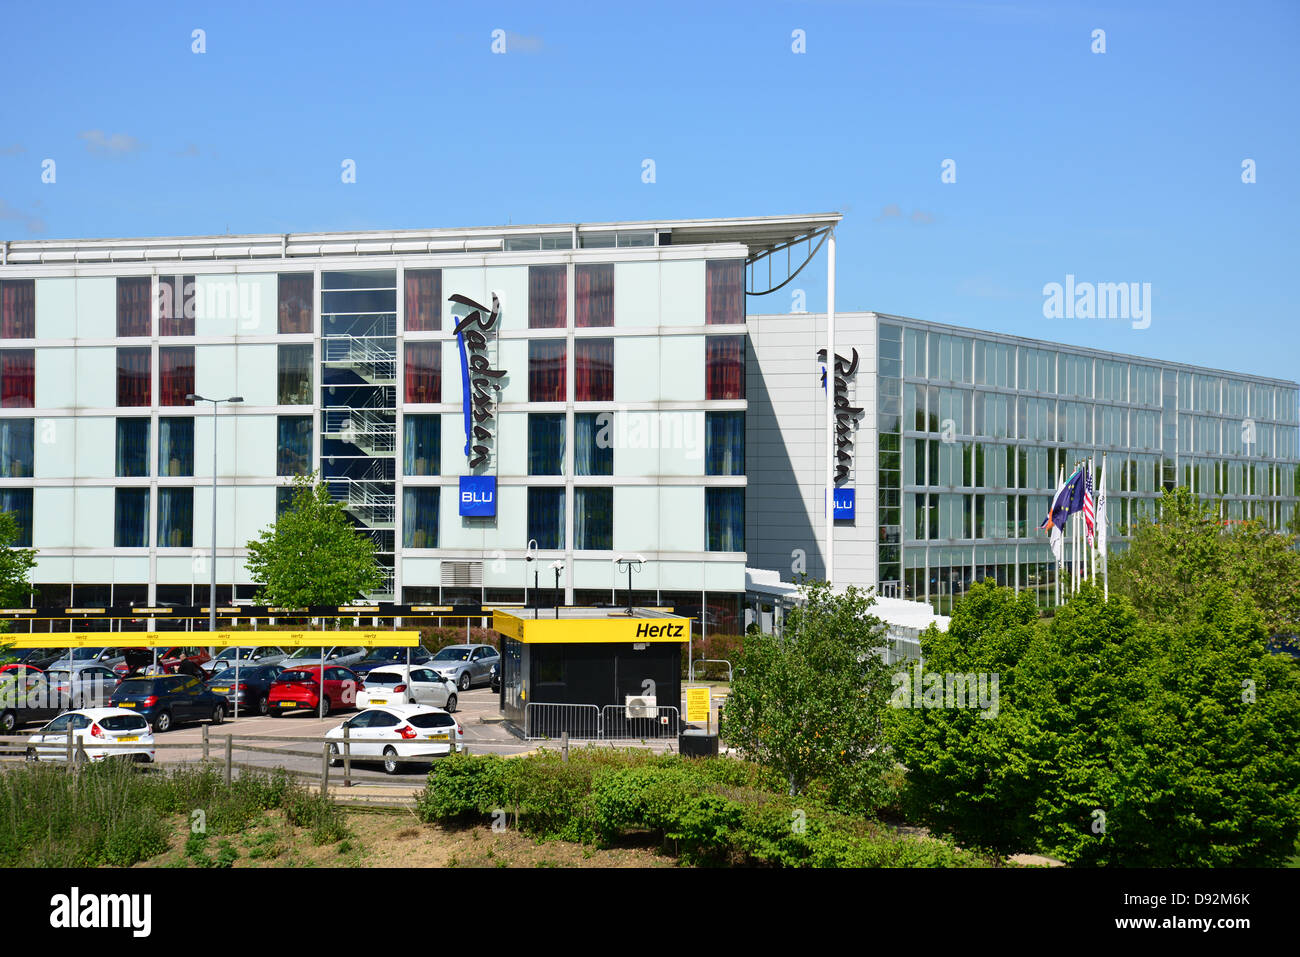 Radisson Blu Hotel at Stansted Airport, Stansted Mountfitchet, Essex, England, United Kingdom Stock Photo